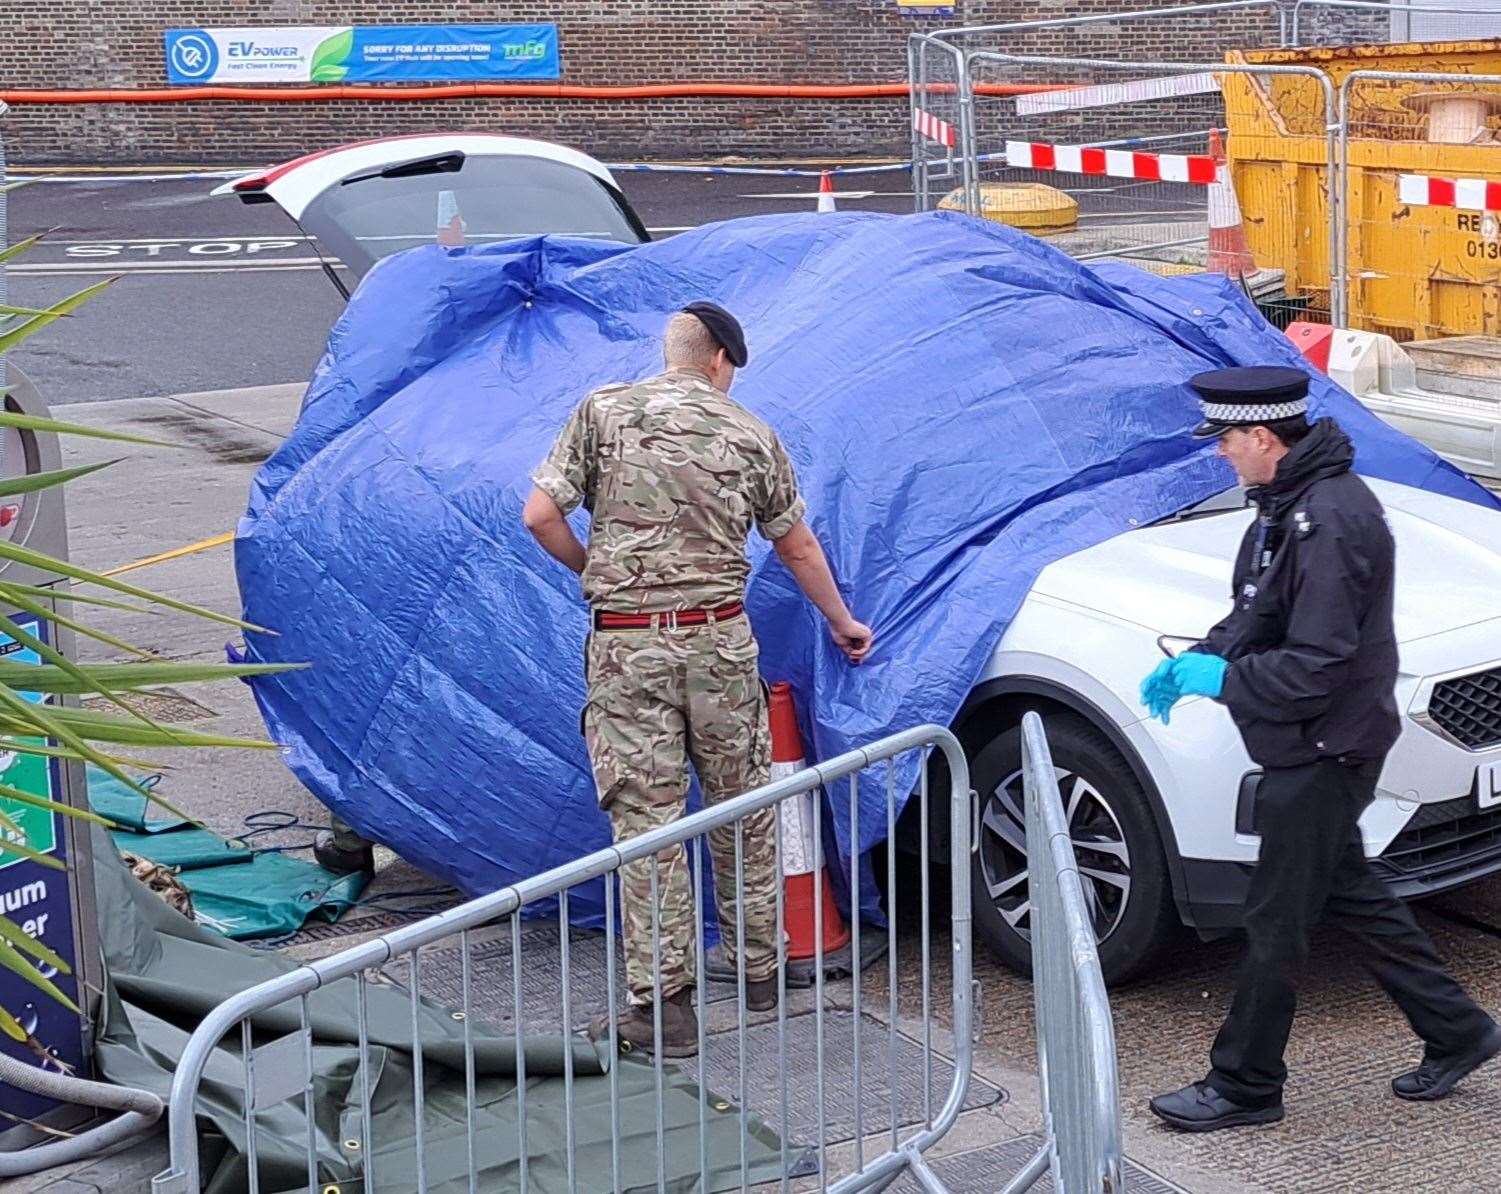 Soldiers and police examine Leak's car inside the Limekiln garage